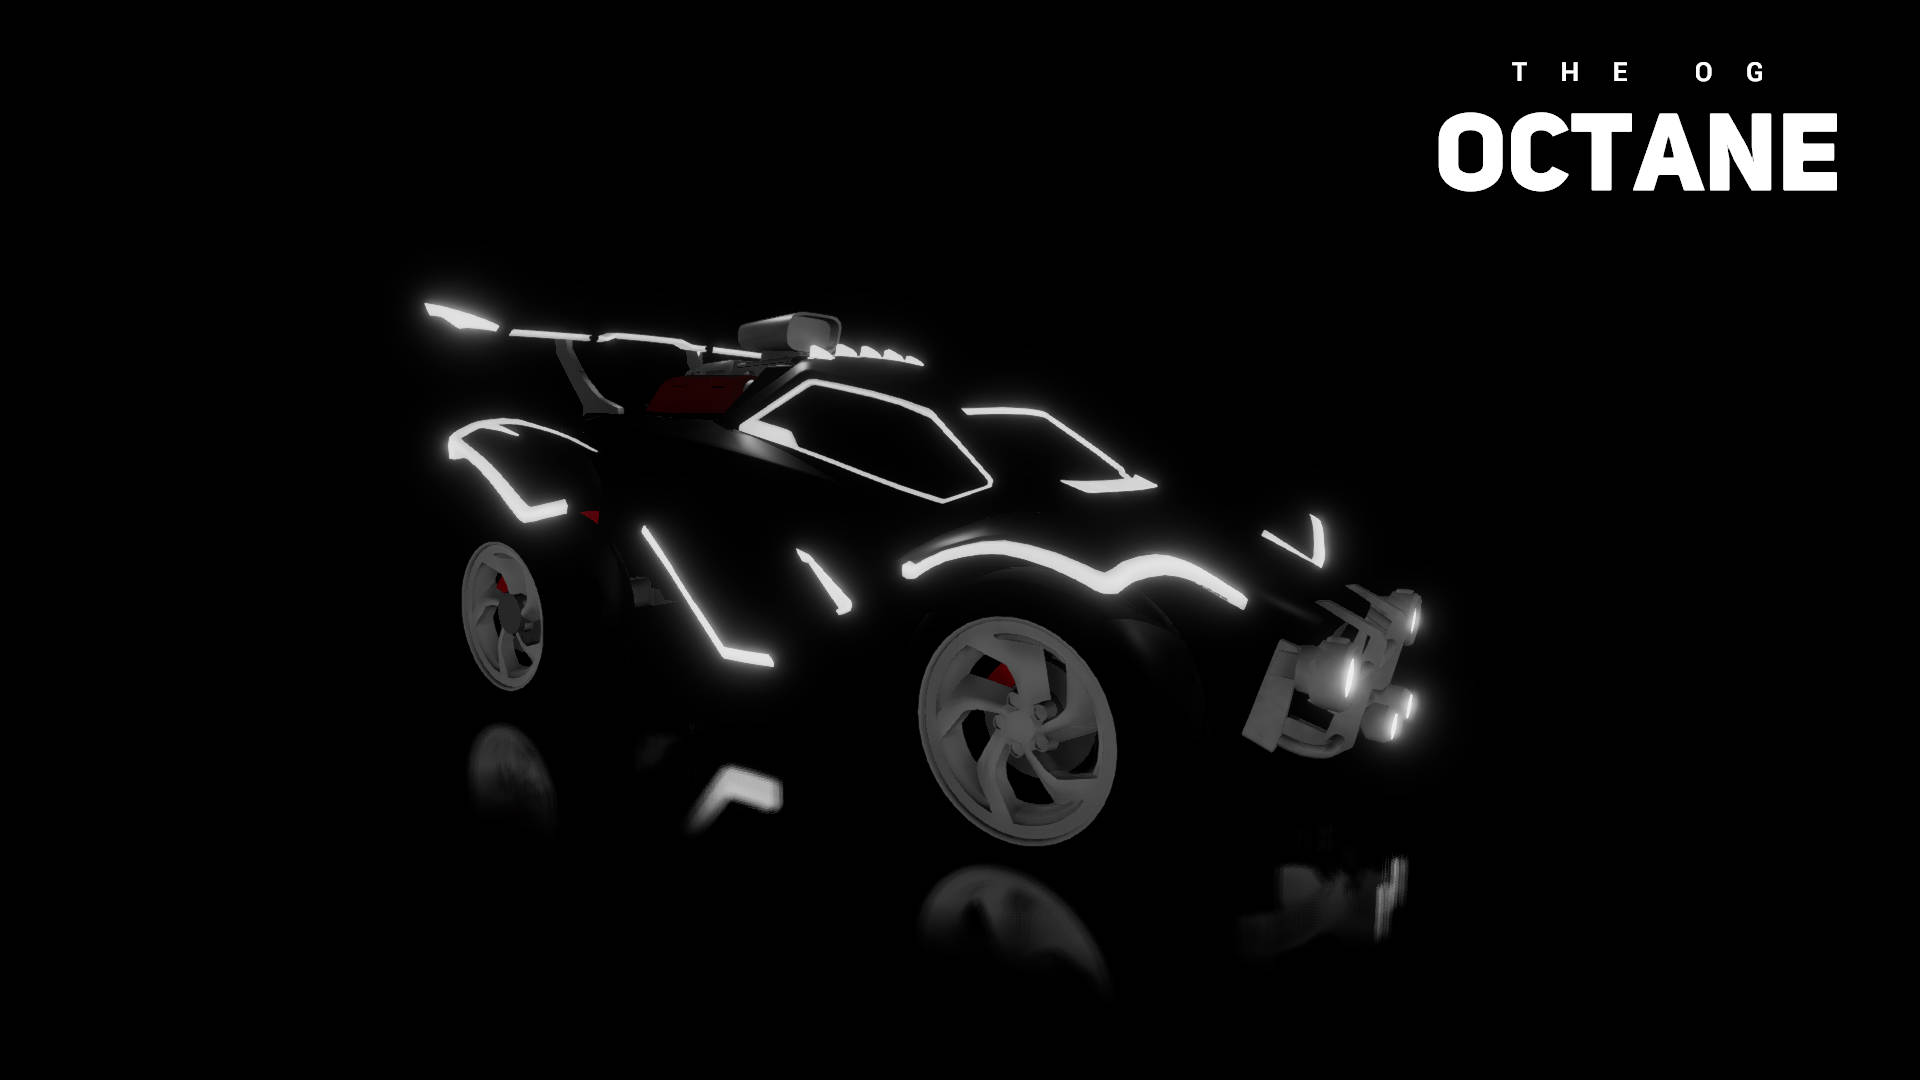 Speed down the pitch in the sleek, black Tron-inspired power car! Wallpaper